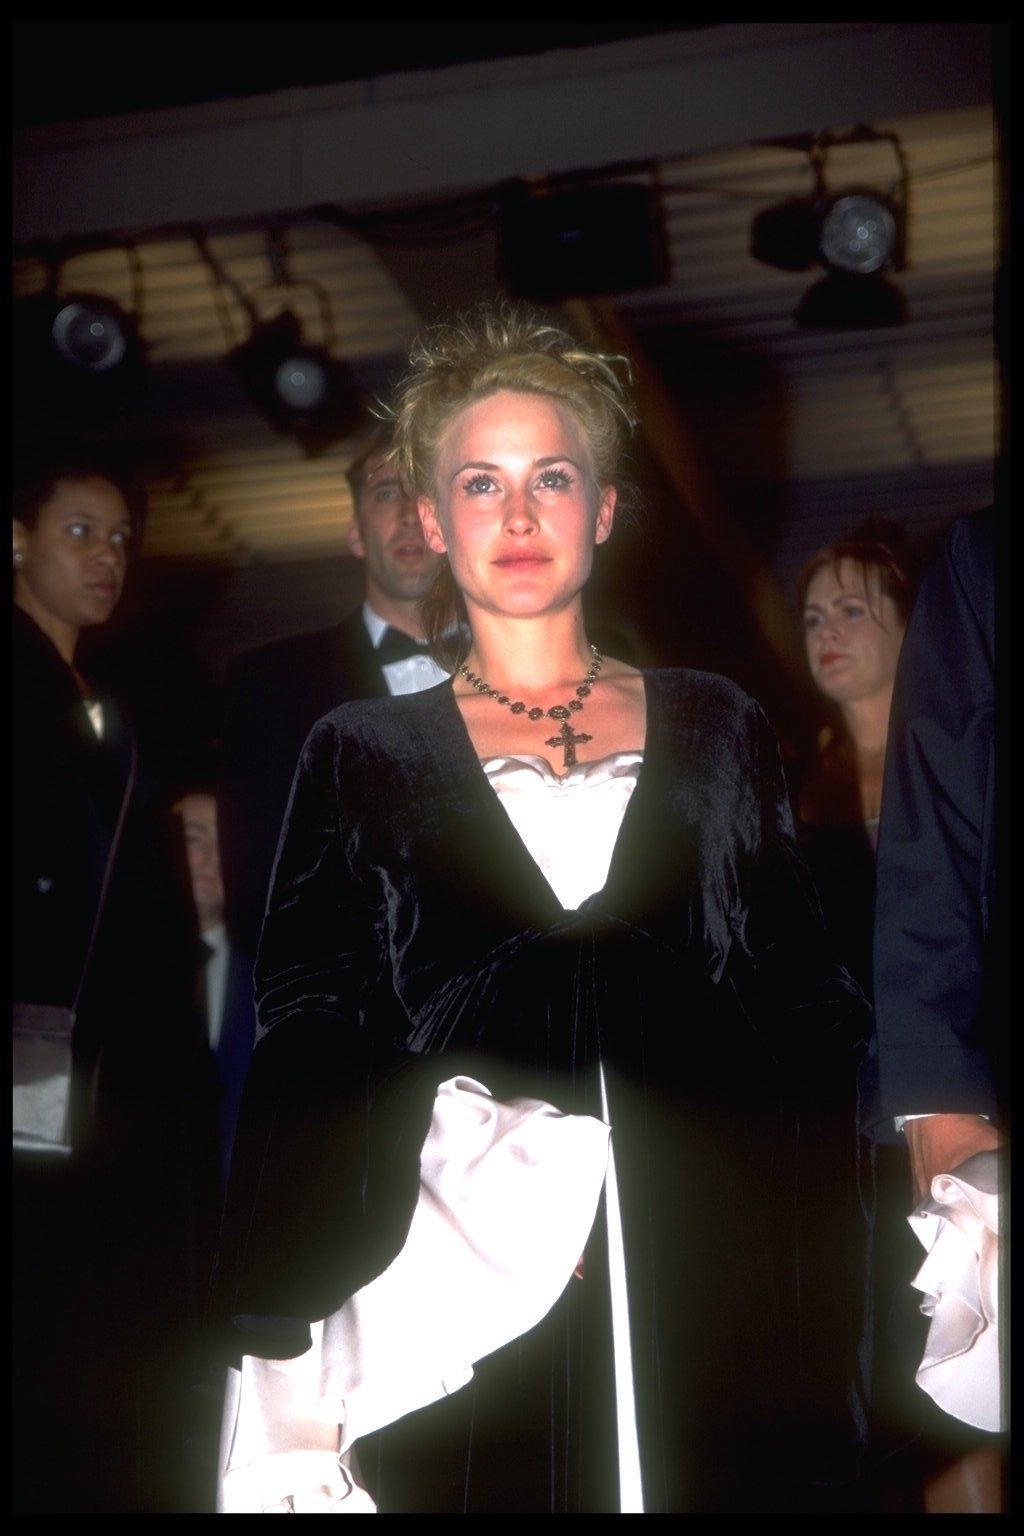 Patricia Arquette at the 48th Cannes Film Festival for the "Beyond Rangoon" premiere in France on May 20, 1995. | Source: Getty Images